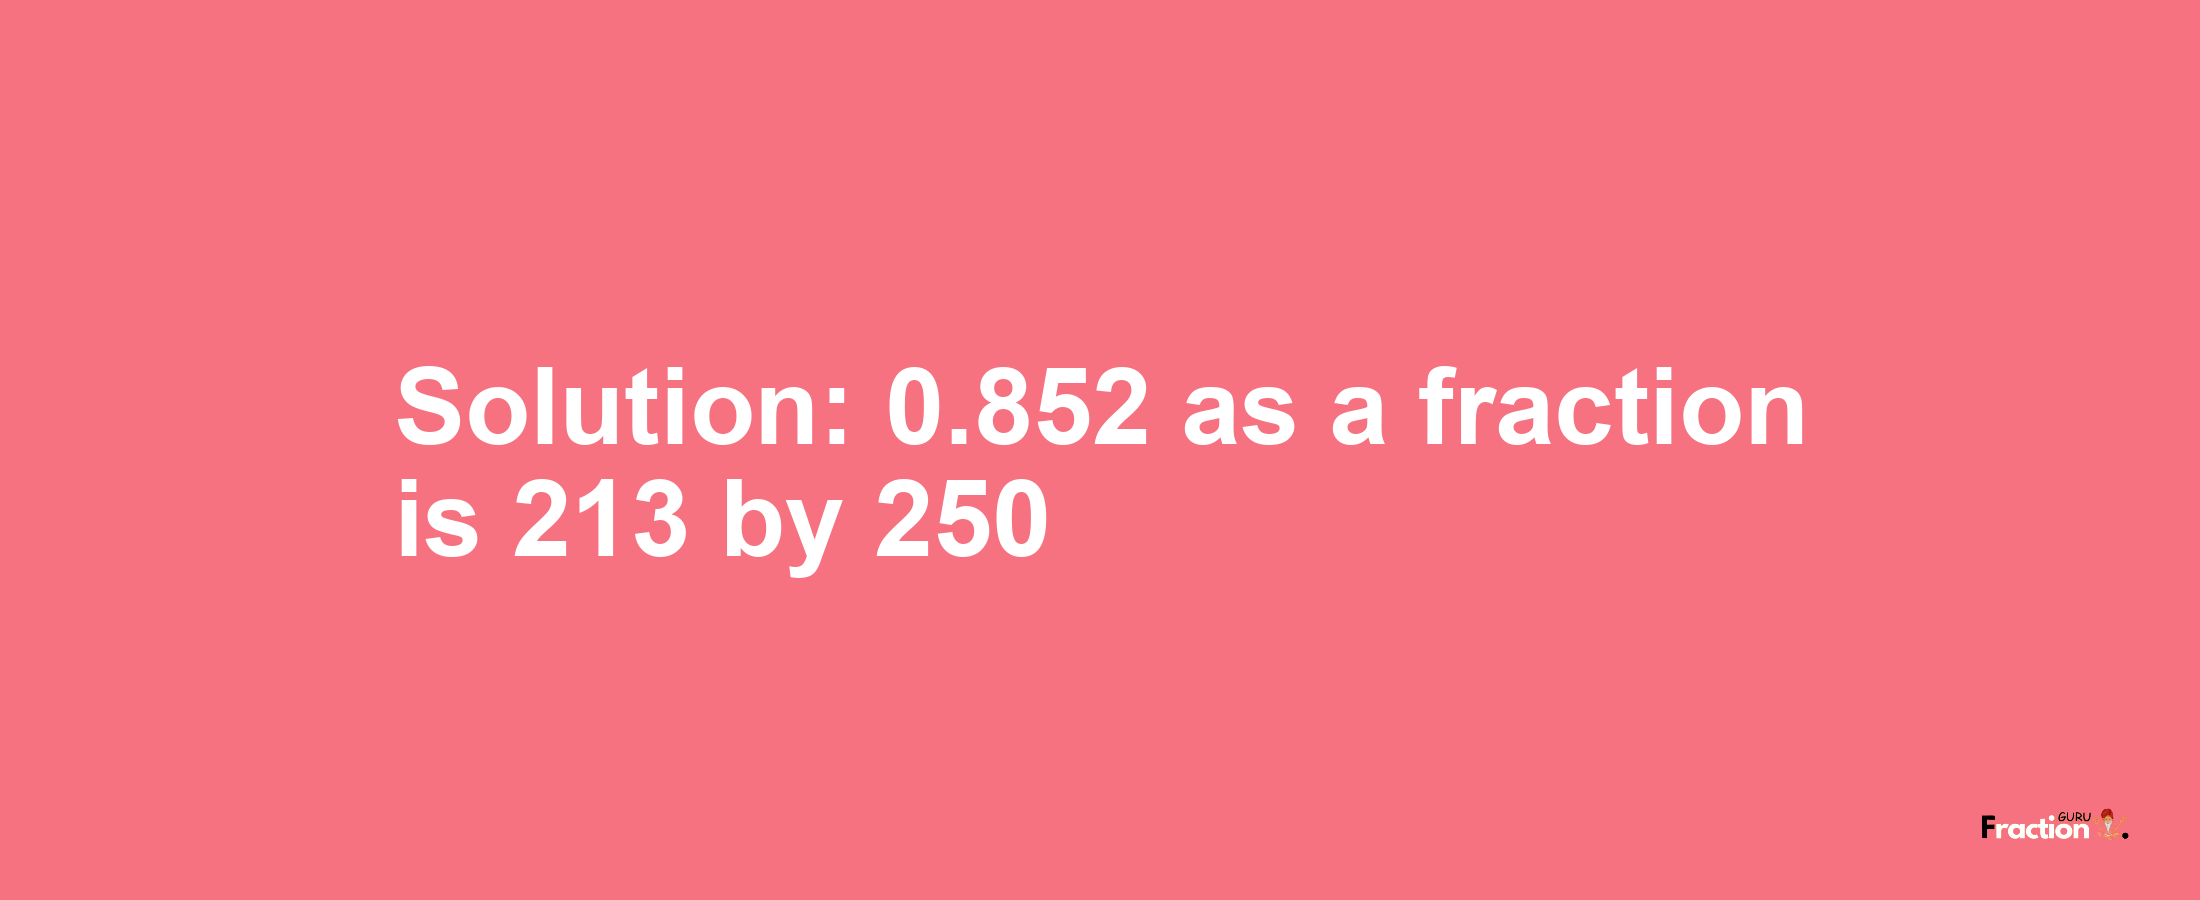 Solution:0.852 as a fraction is 213/250